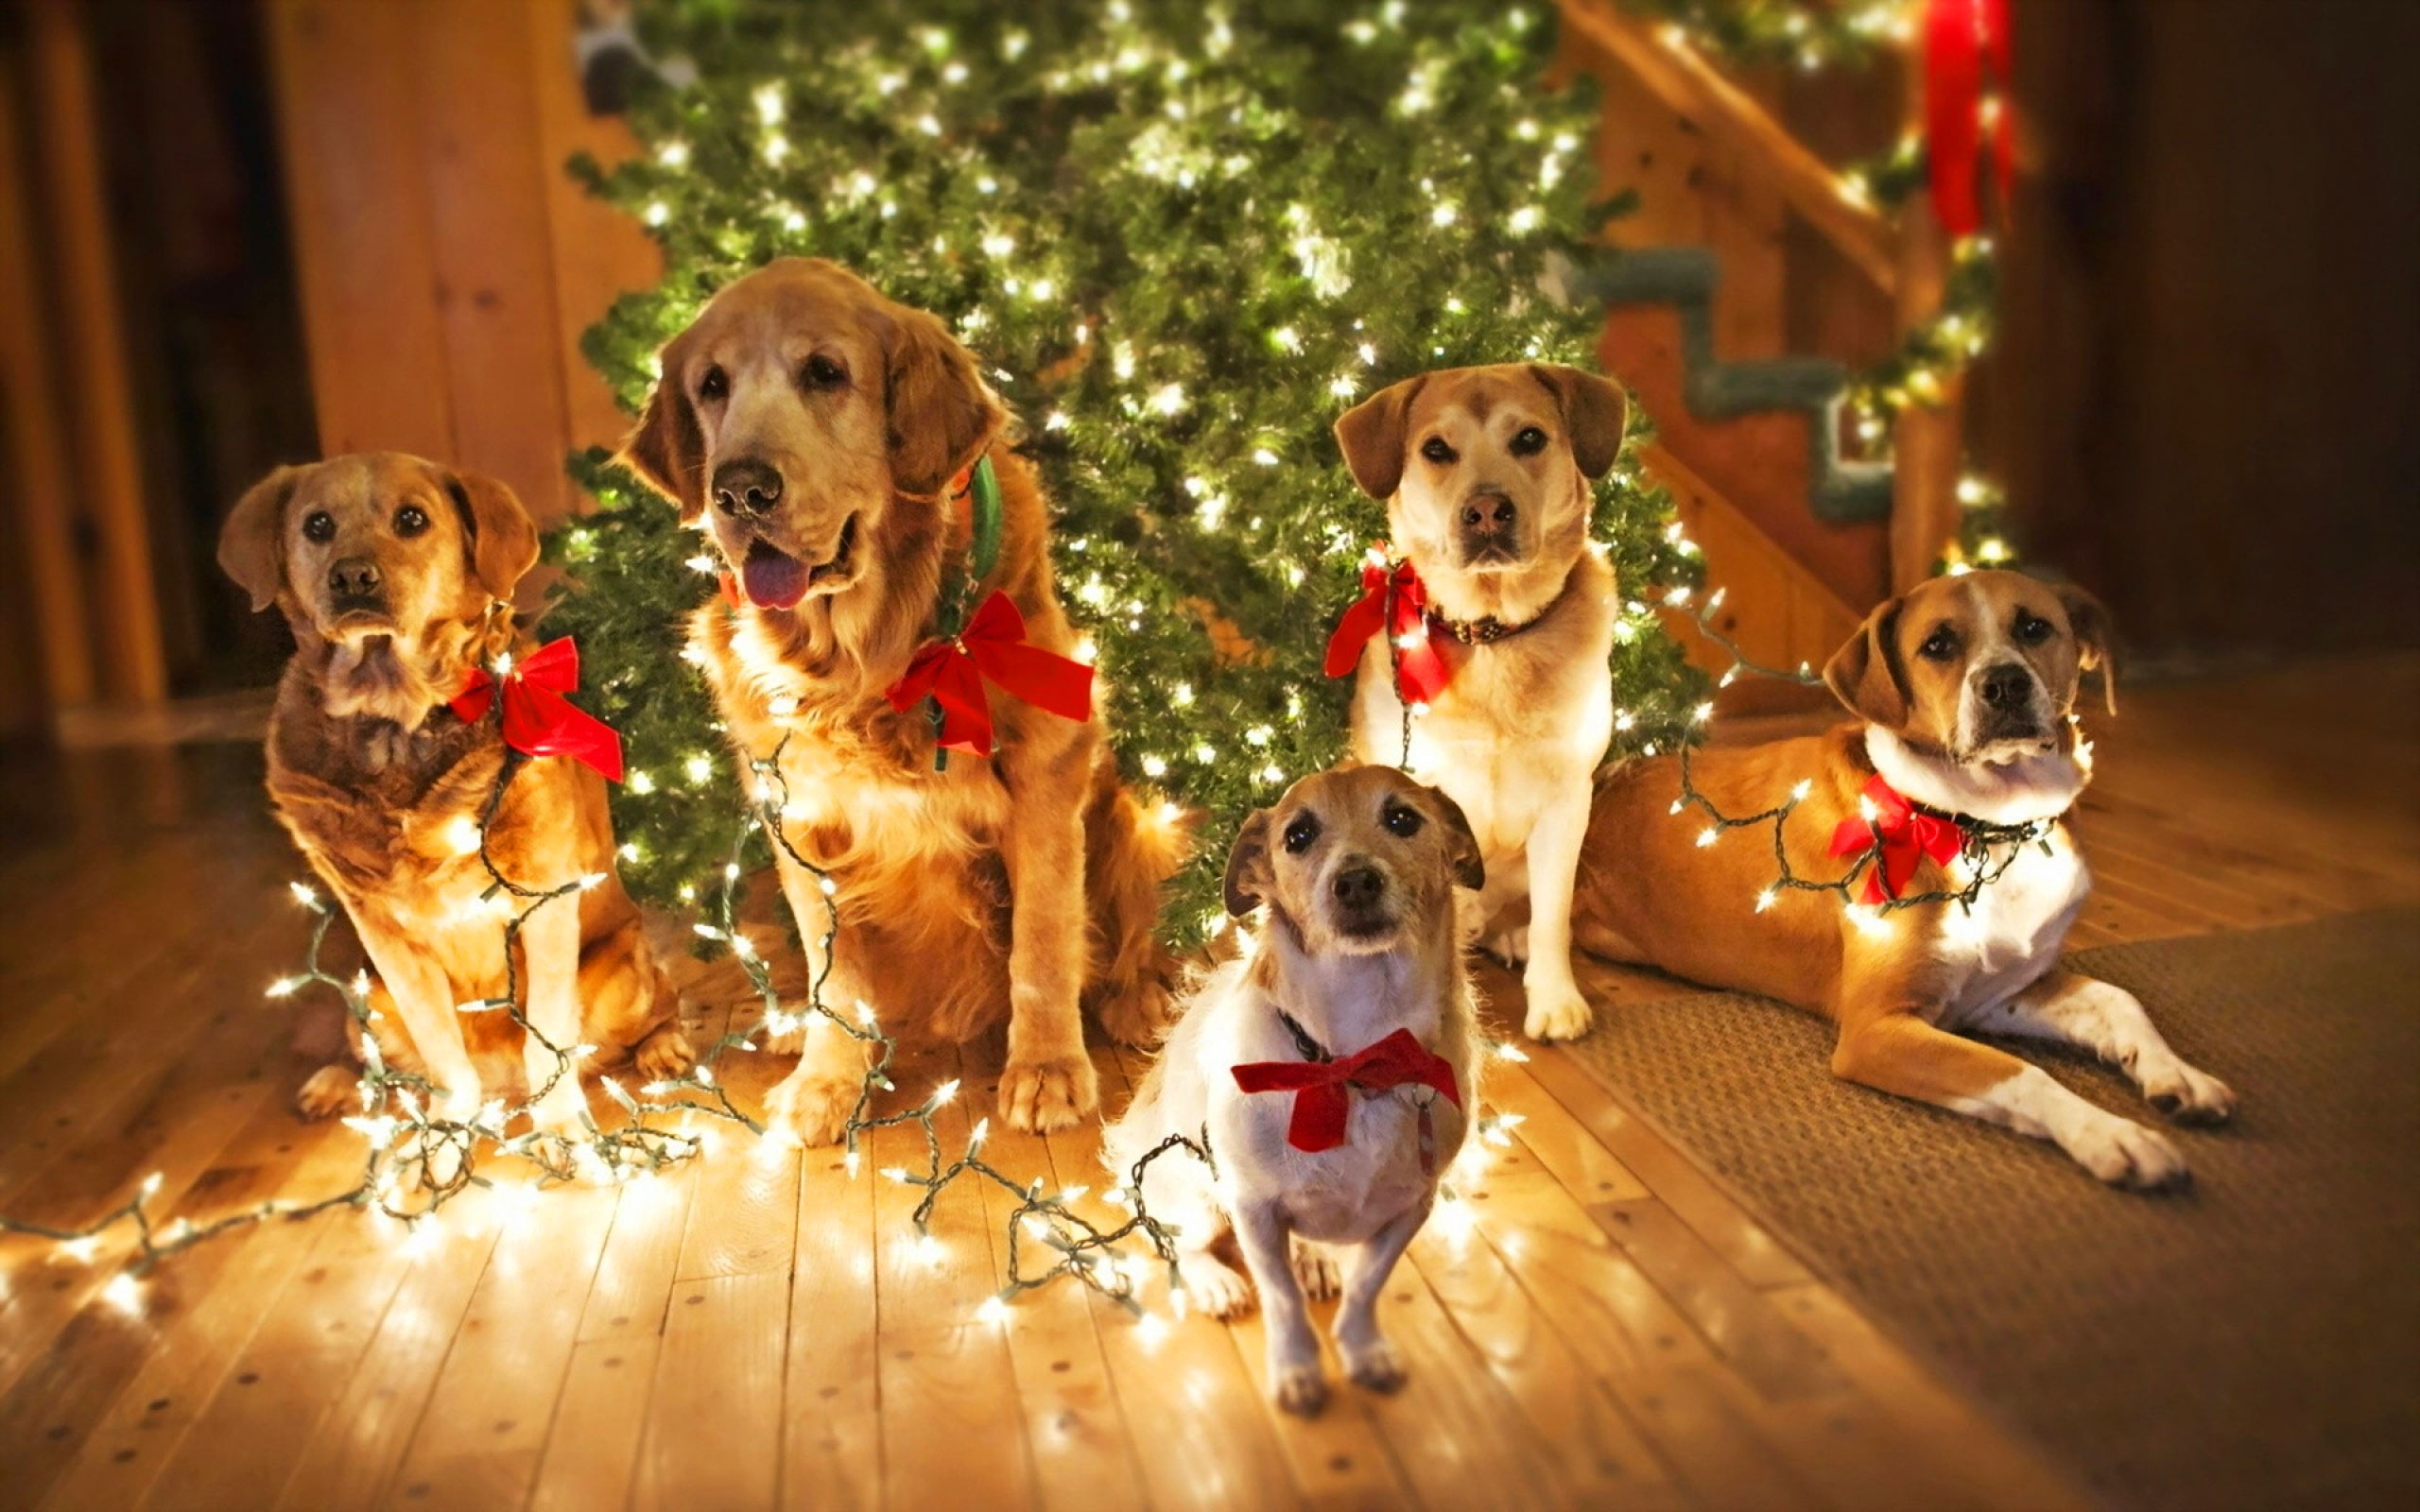 Cute Dogs Christmas Eve Puter Desktop Wallpaper Pictures Image